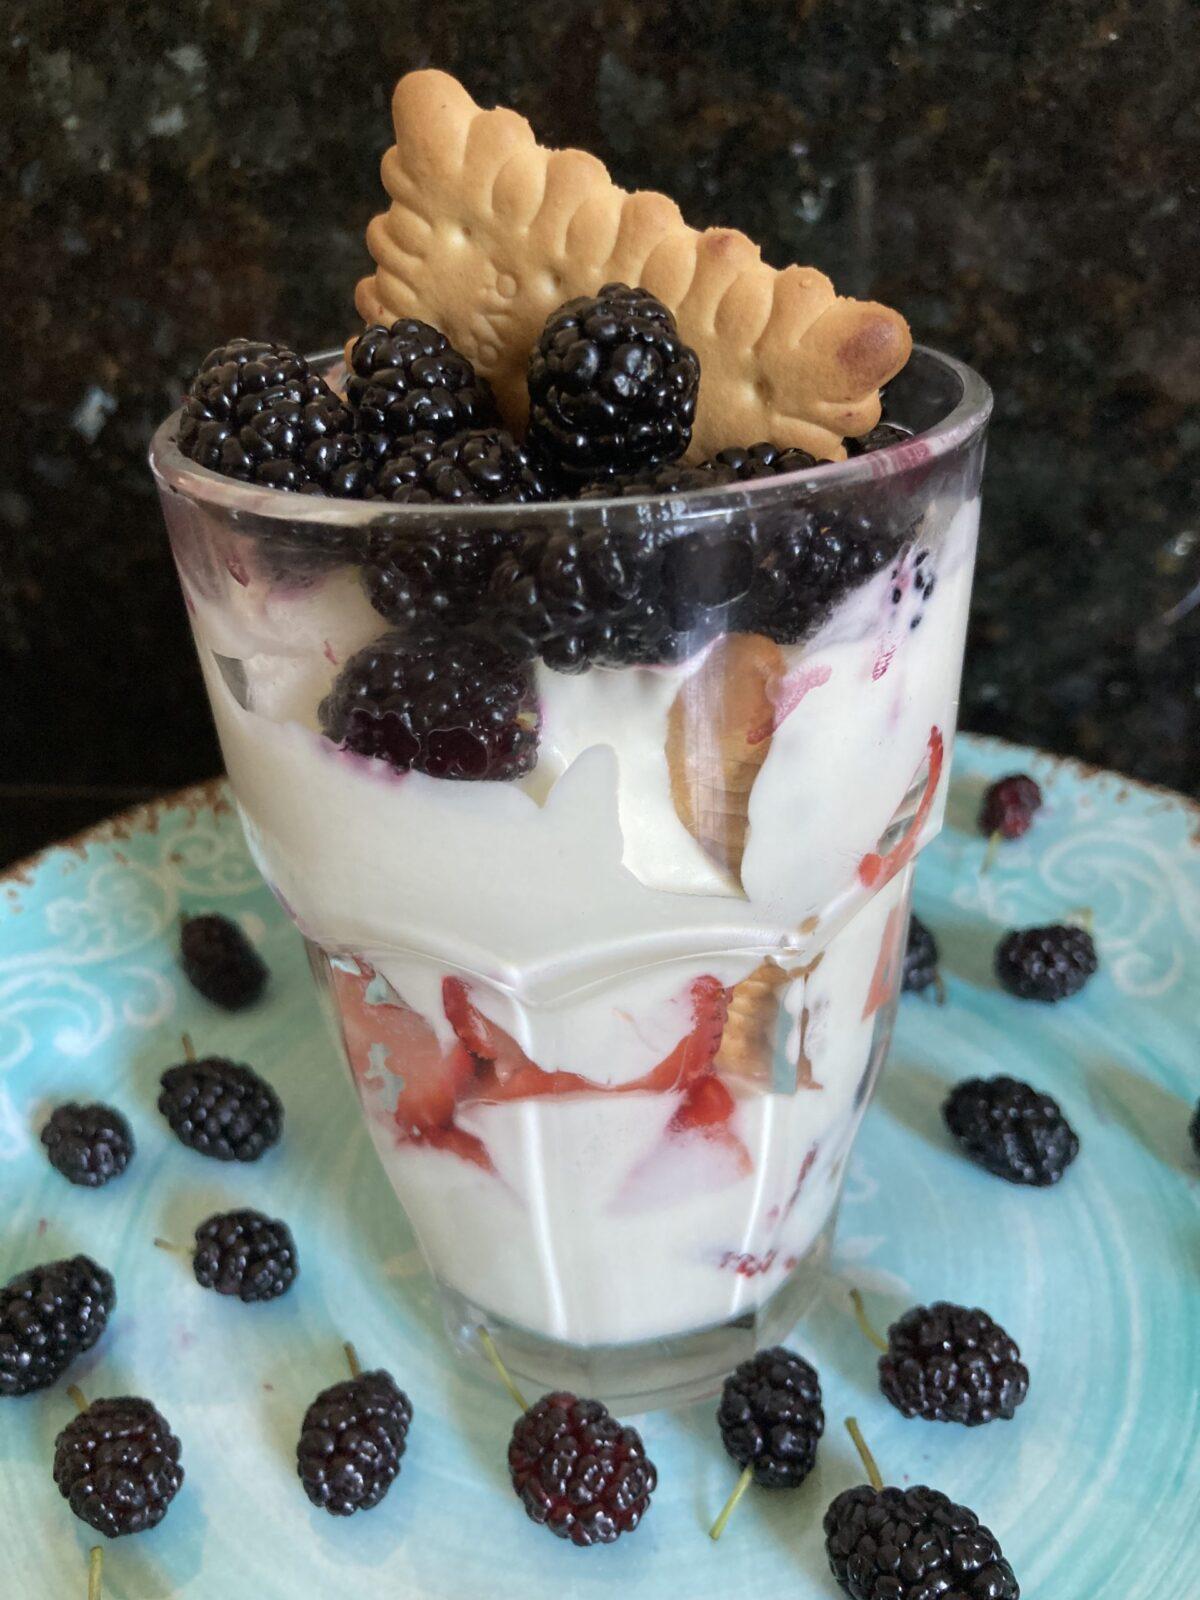 A mix of home-gathered berries, vanilla cookies, and rich labne push this parfait into shortcake territory. (Ari LeVaux)